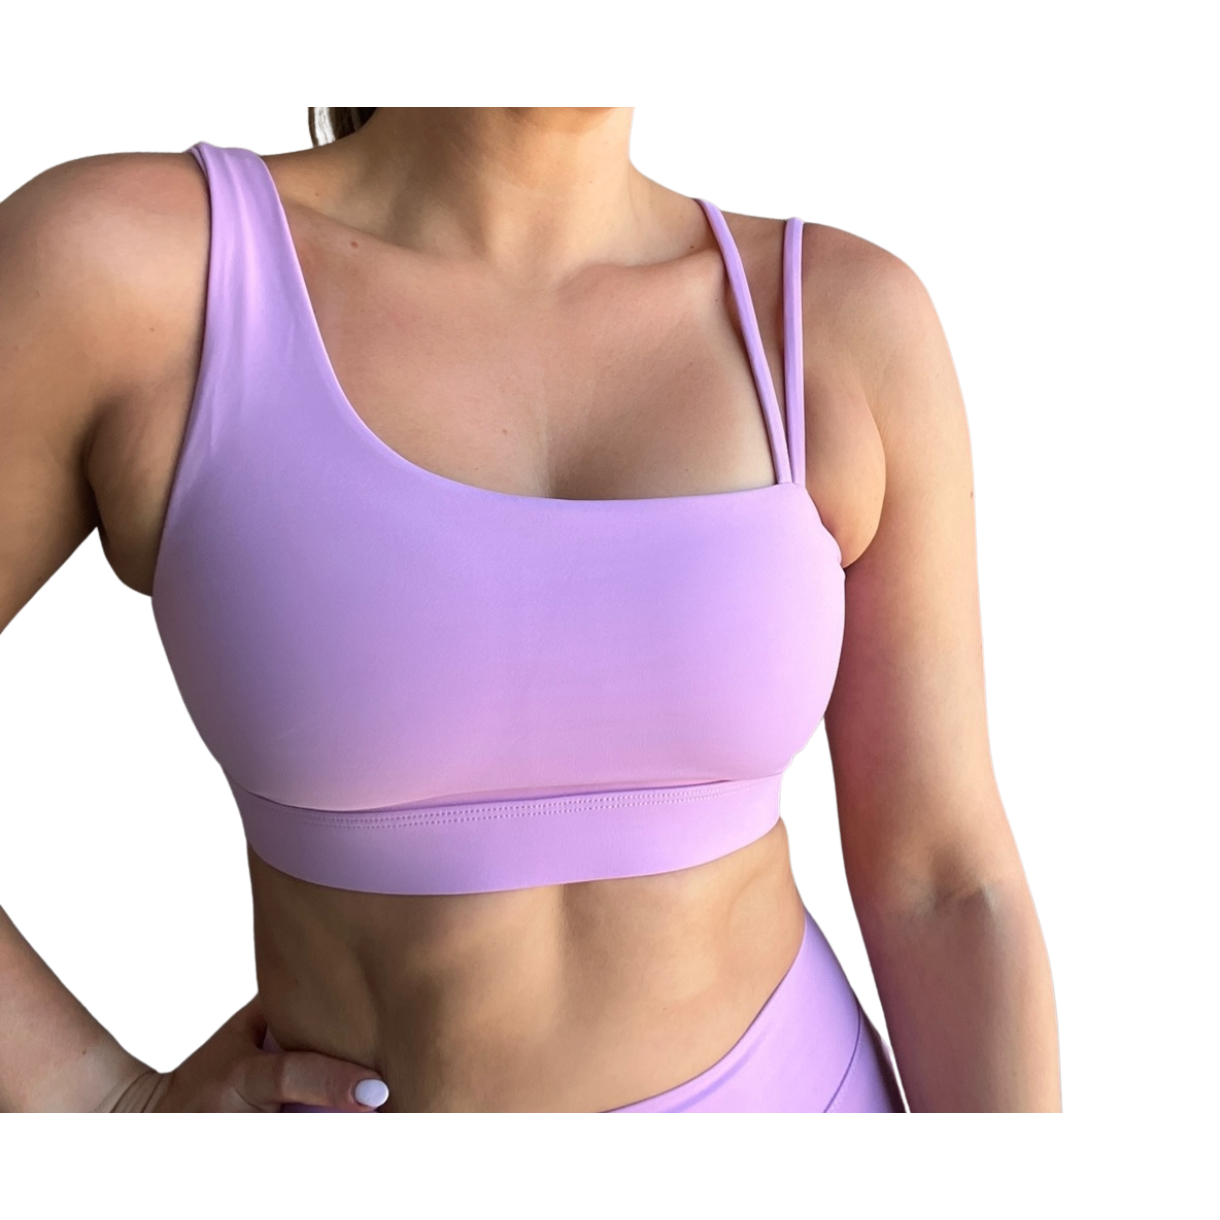 Lavender asymmetrical sports bra with one thick strap and two thinner straps